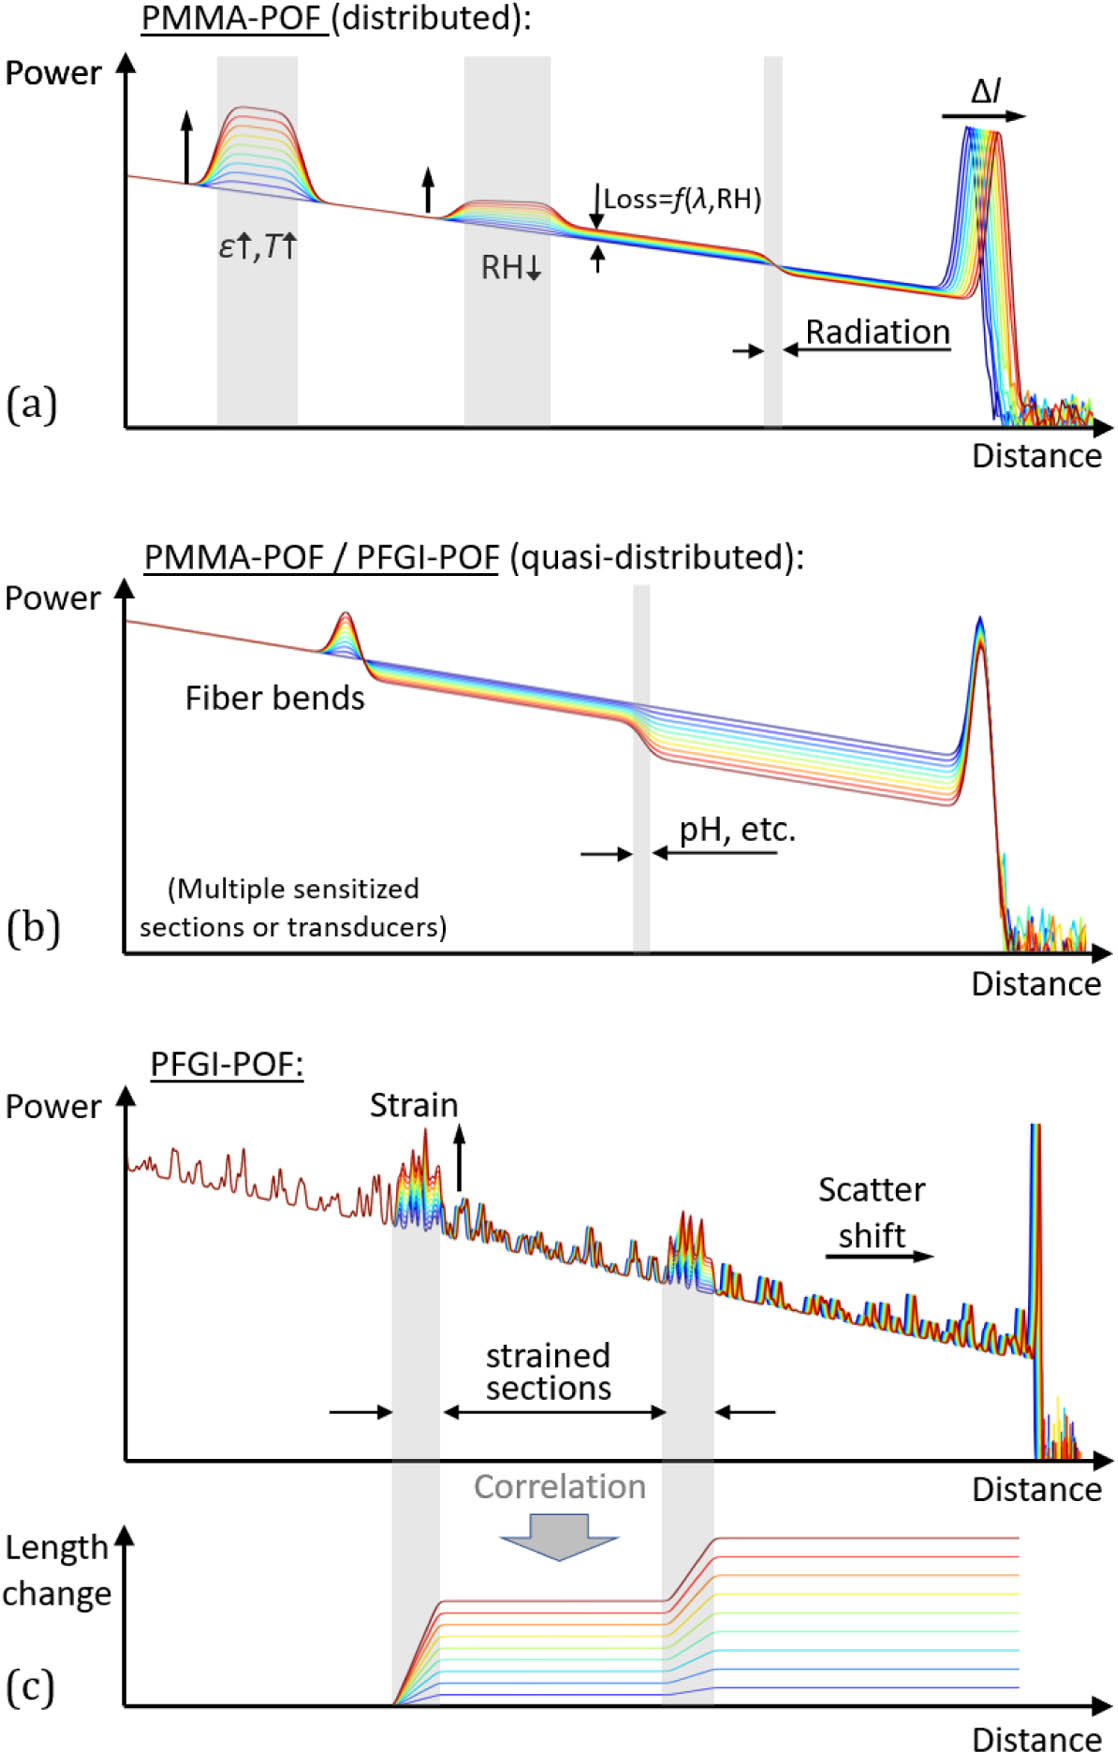 Schematic examples for Rayleigh-based techniques. (a) Distributed Rayleigh backscatter analysis for the measurement of strain changes ε, temperature T, radiation, and RH. Length change measurement due to Fresnel reflection shift is indicated. (b) Examples for quasi-distributed sensing based on sensitized fiber sections or transducing elements. (c) Example for distributed strain sensing in PFGI-POFs and the evaluation of length change distribution from backscatter shift analysis.